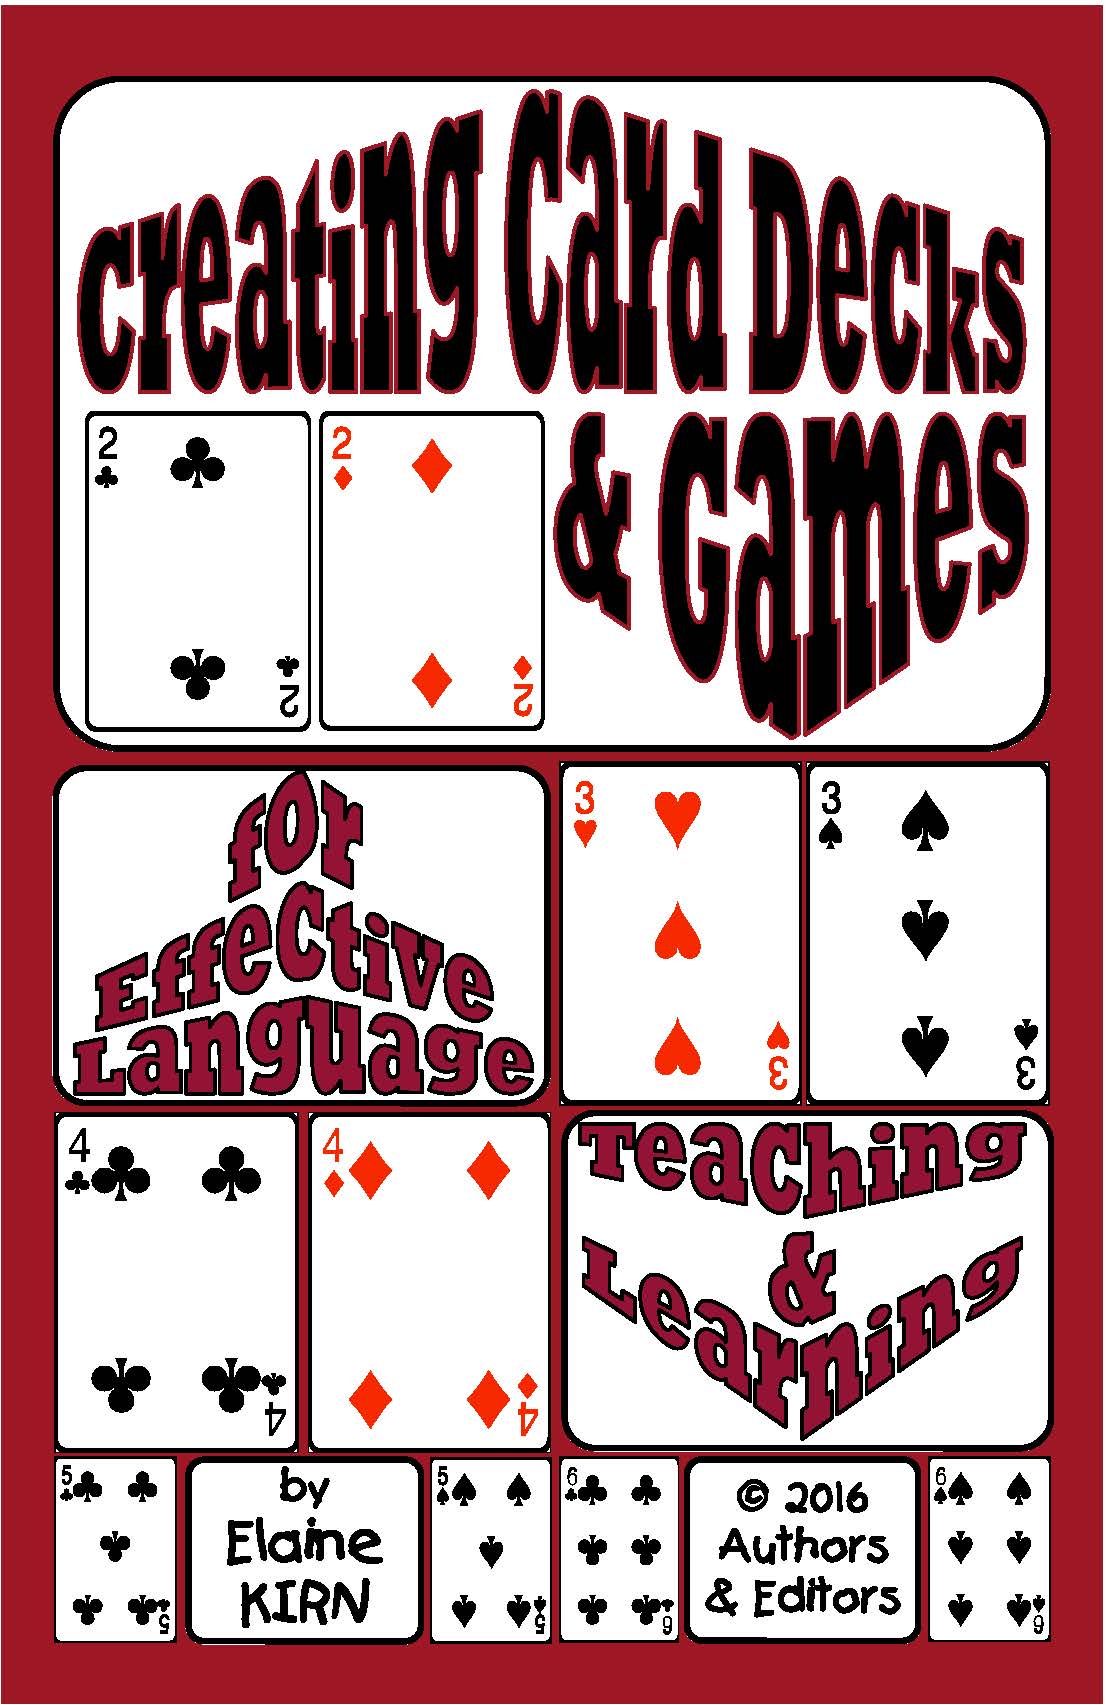 Creative Card Decks & Games 52-Page How-to Resource Book (Print Version + Shipping)